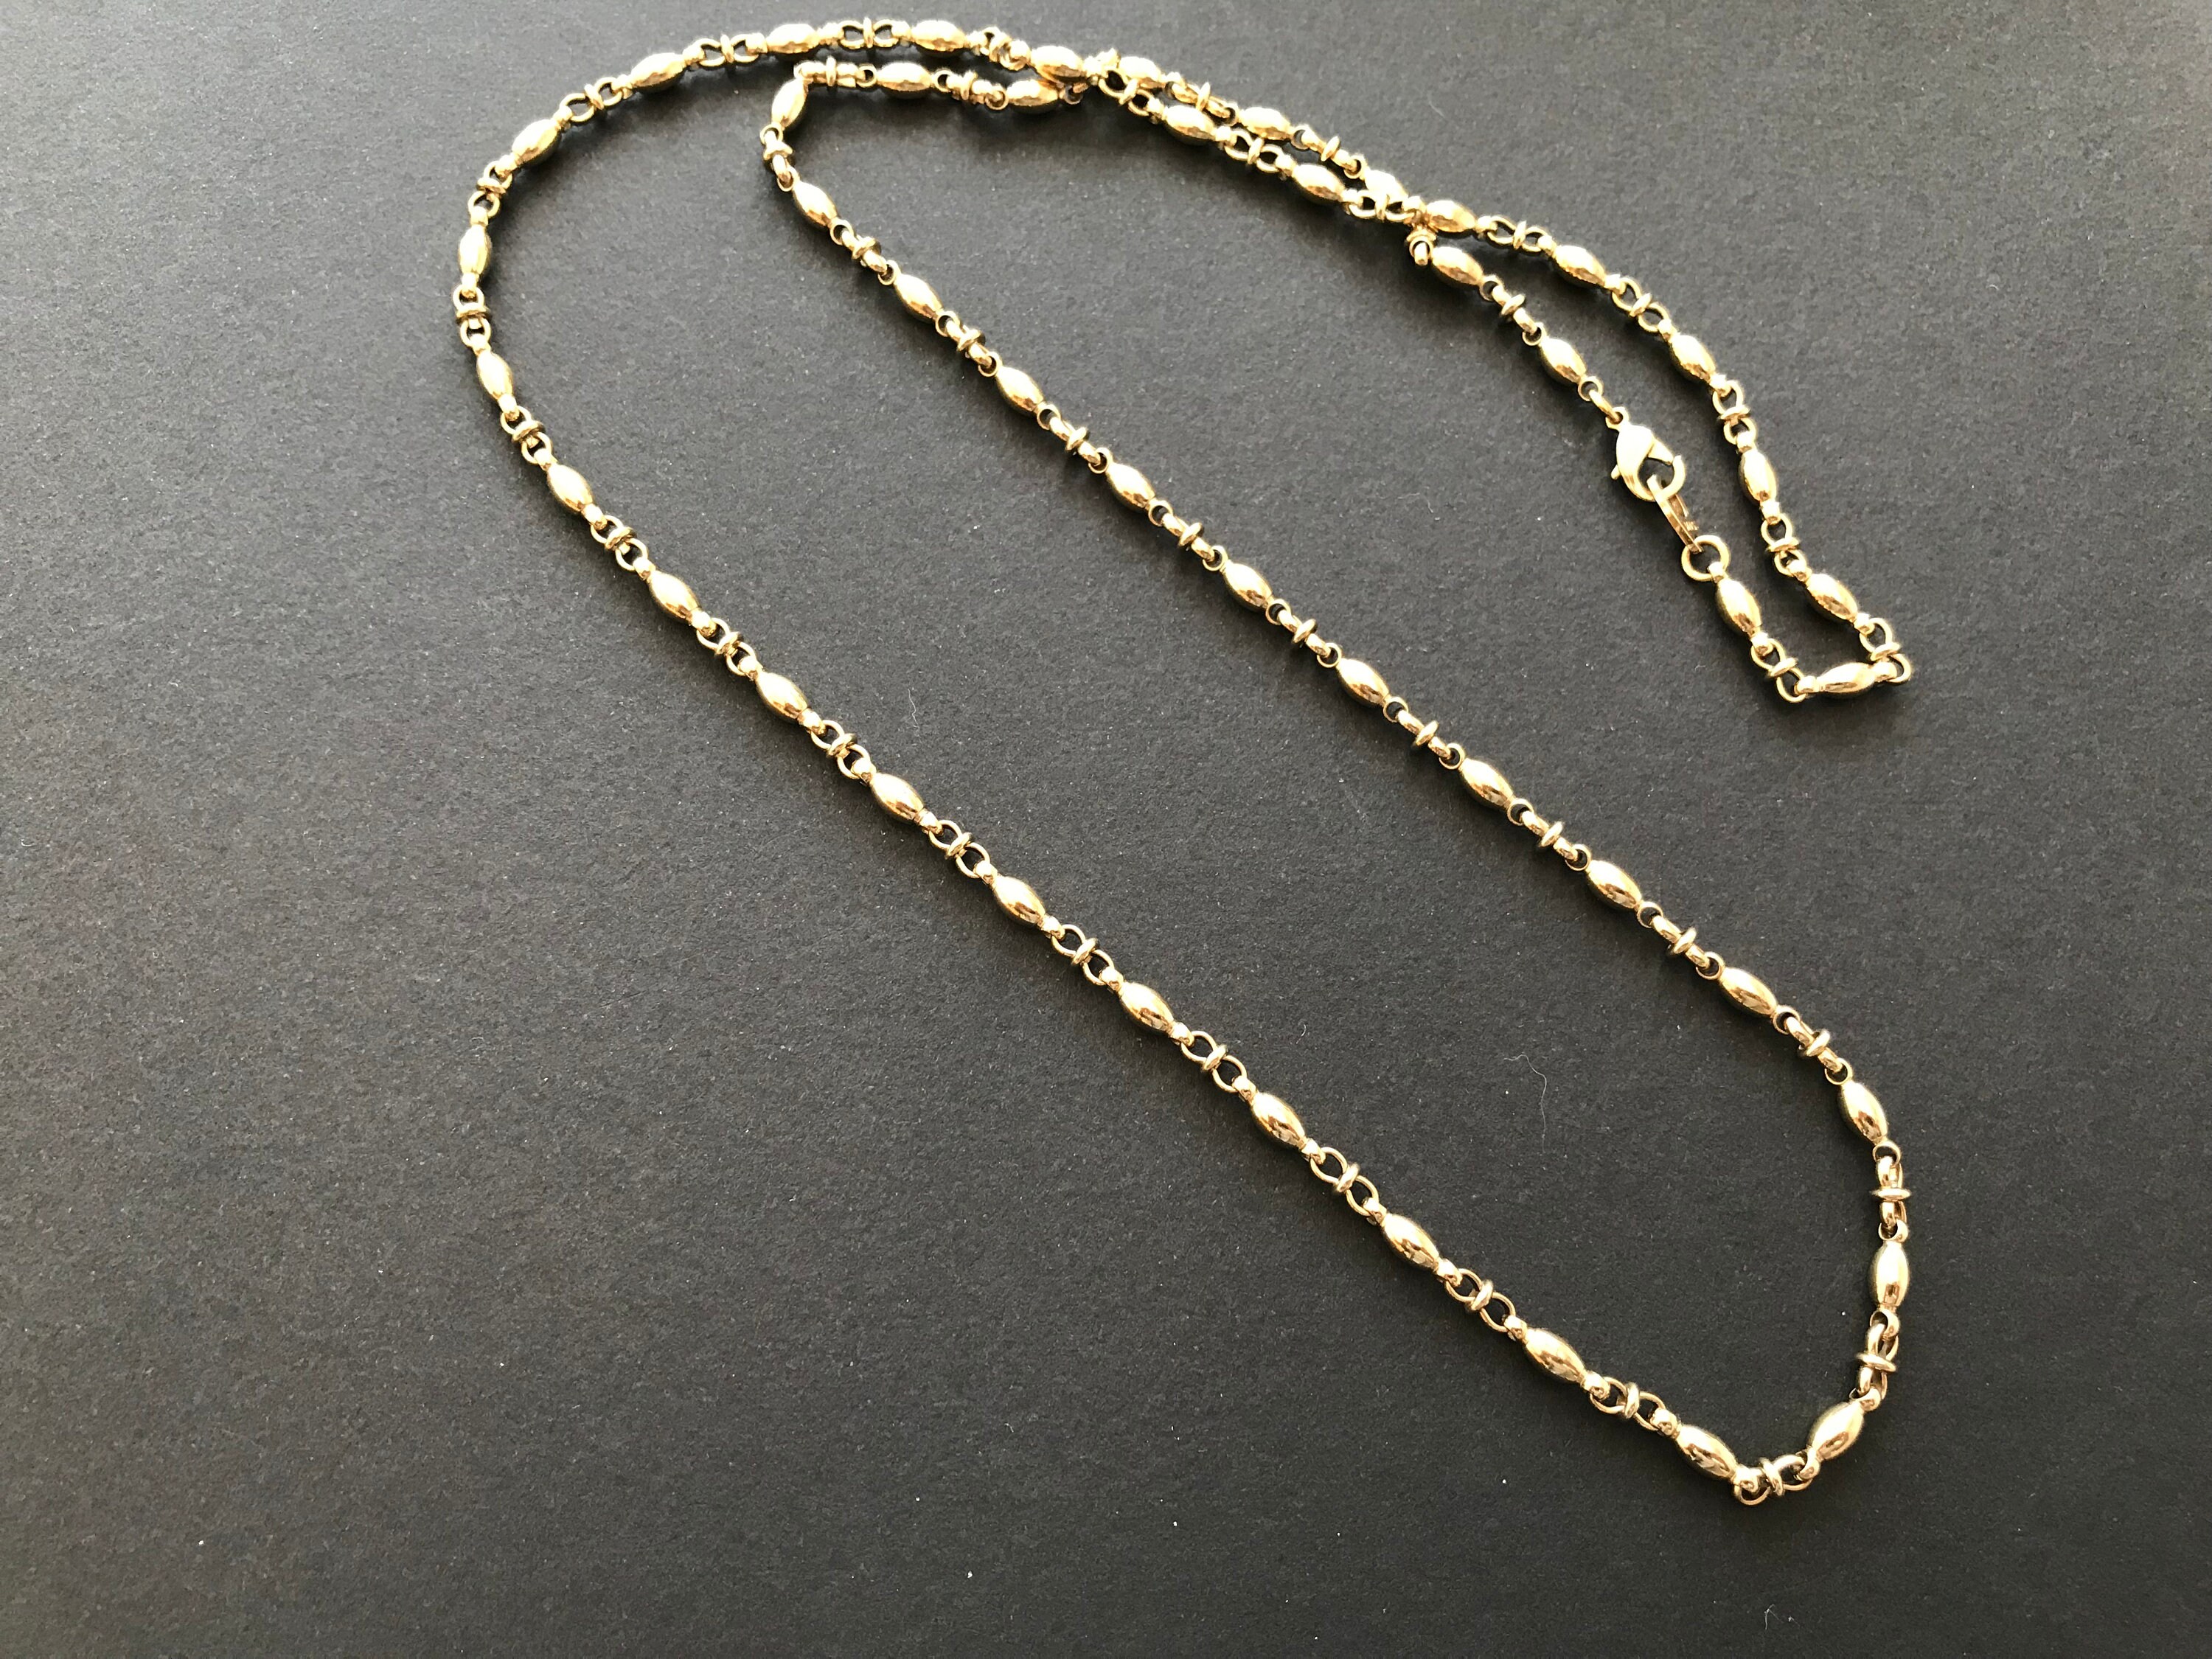 Vintage Gold Tone Ornate Chain Link Necklace Signed M & S | Etsy